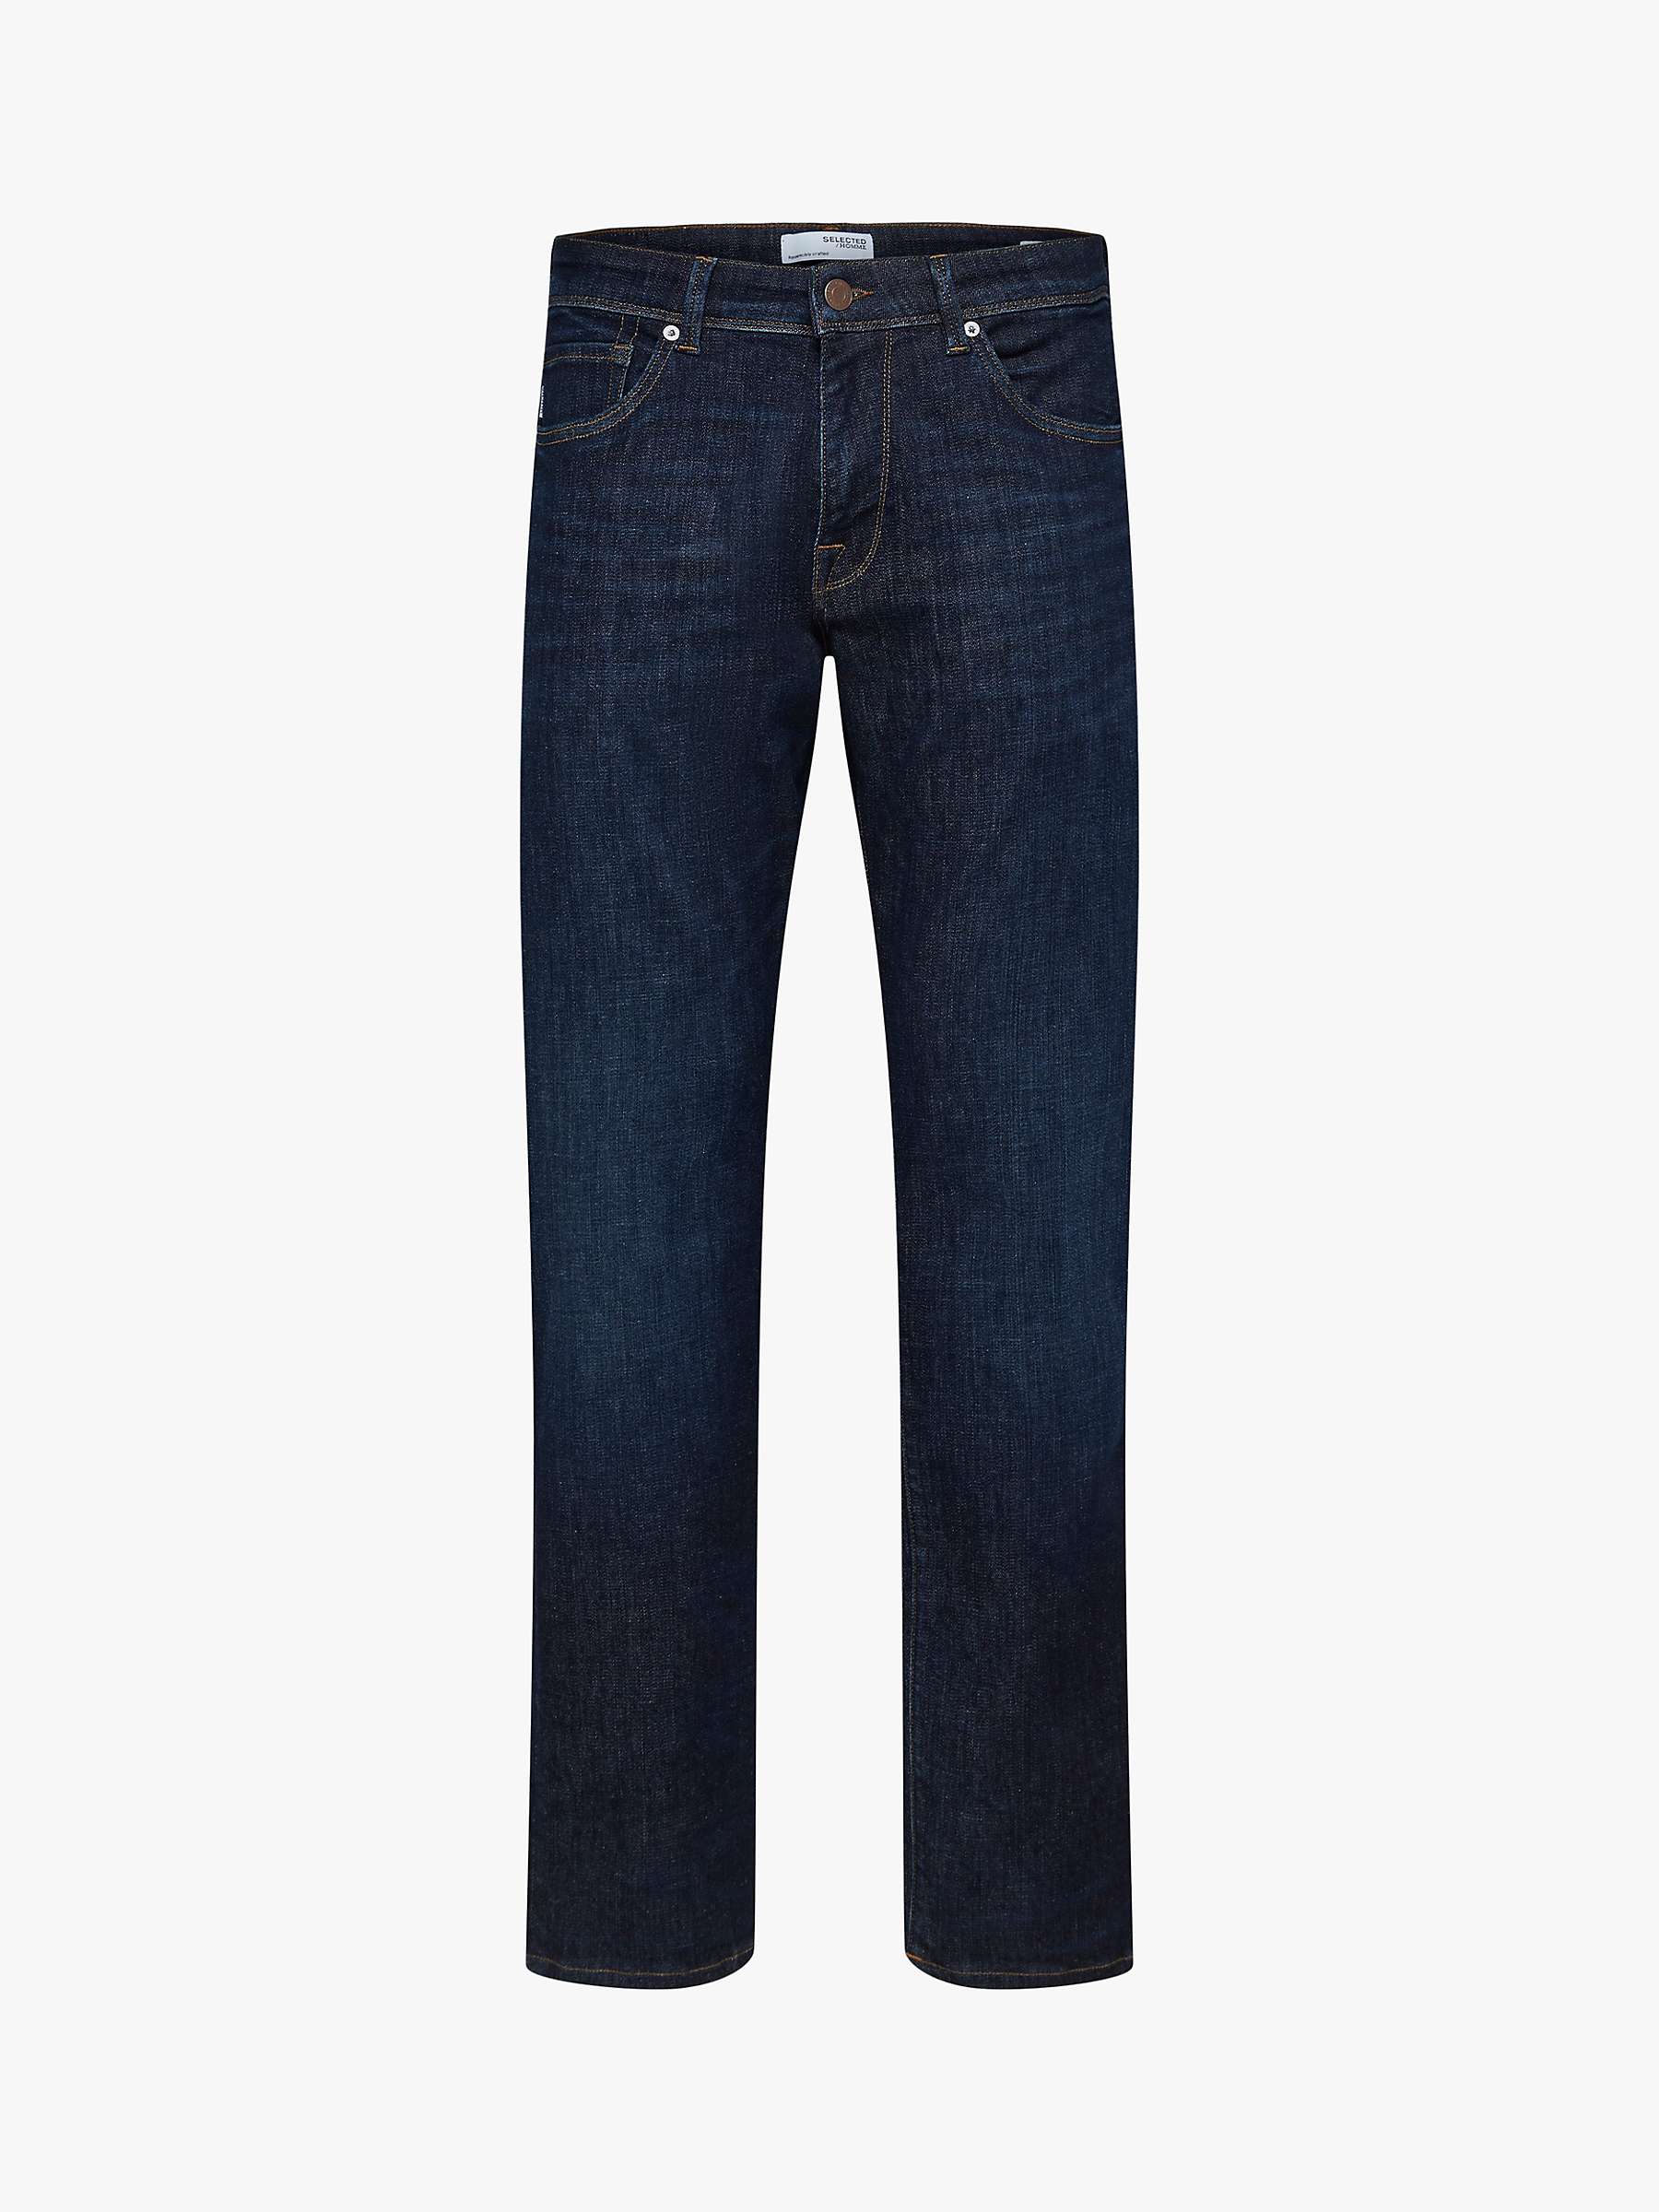 Buy SELECTED HOMME Everyday Straight Jeans, Blue Online at johnlewis.com